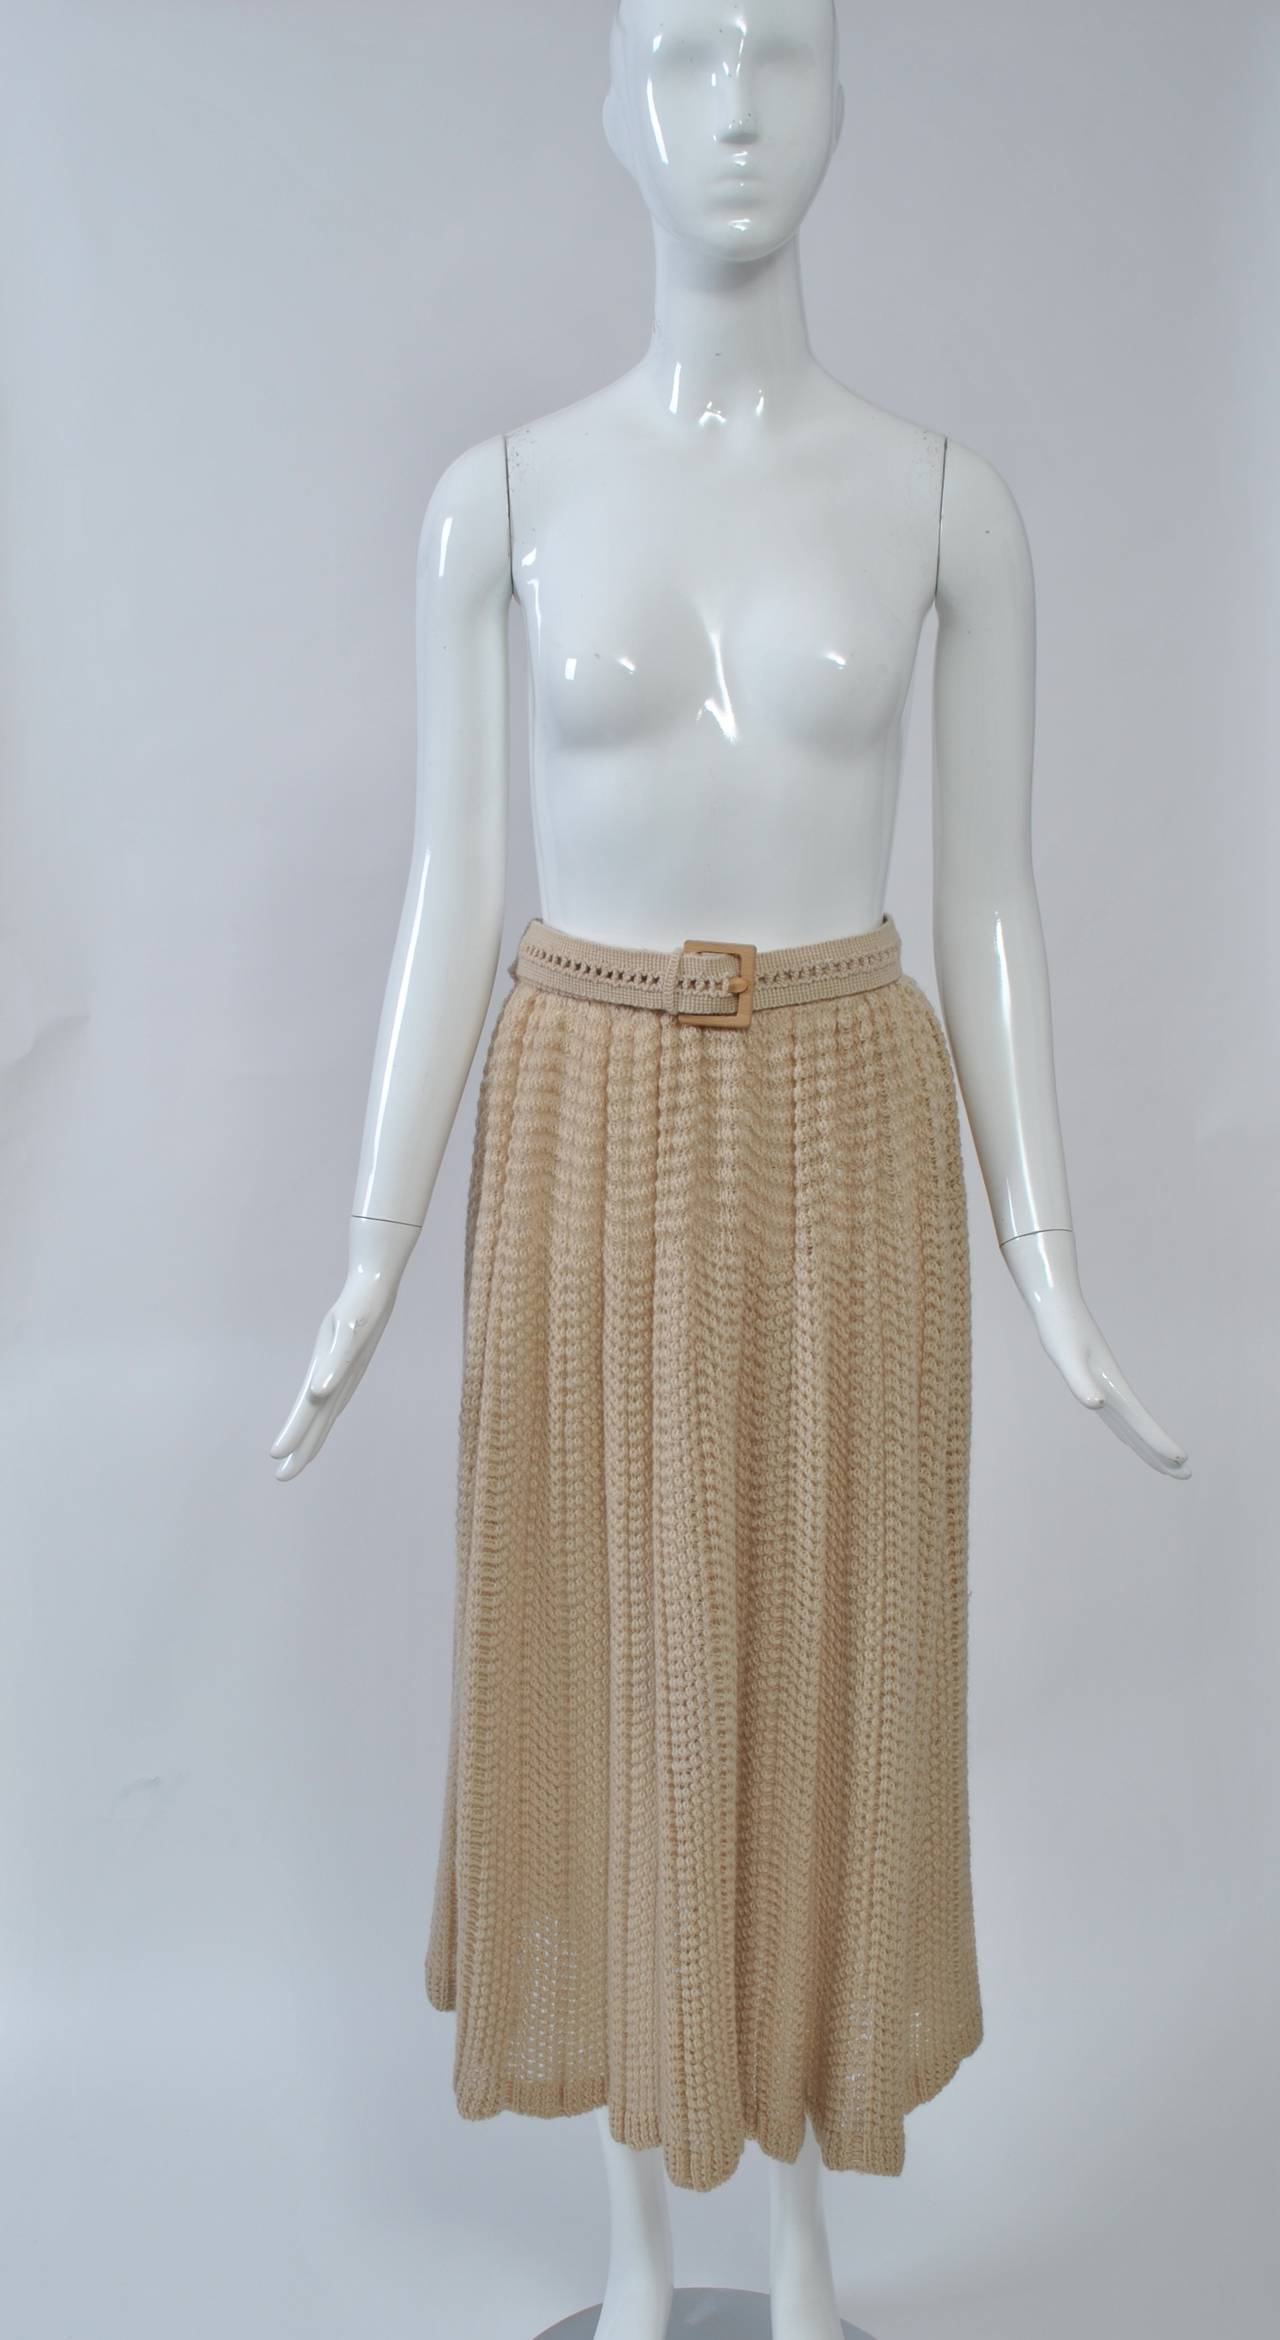 Missoni 1970s beige openwork knit skirt falls softly to mid calf and has a matching knit belt with wooden buckle. The knit runs horizontally across the hip area and vertically below. The waist is elasticized so can expand to fit a 32